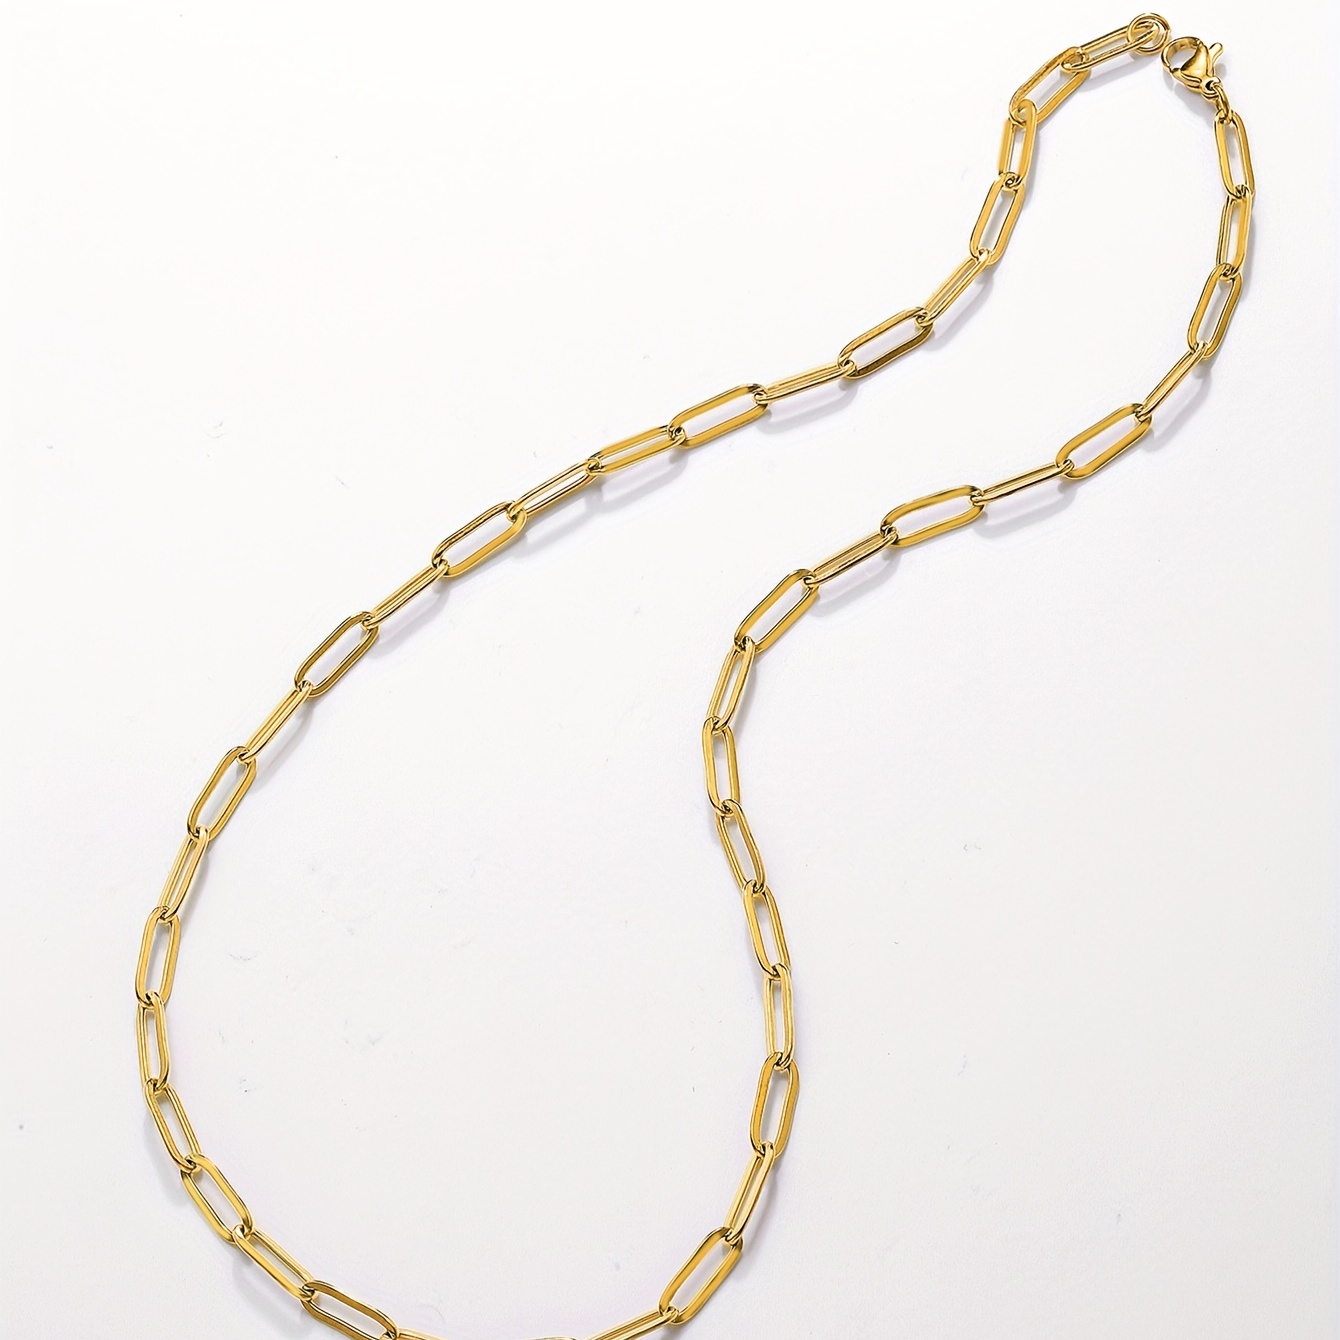 High Grade 18K Solid Gold Chains - 2,45mm Paperclip Link Chain 20 inches(50cm) / G-2.45 by Pearde Design